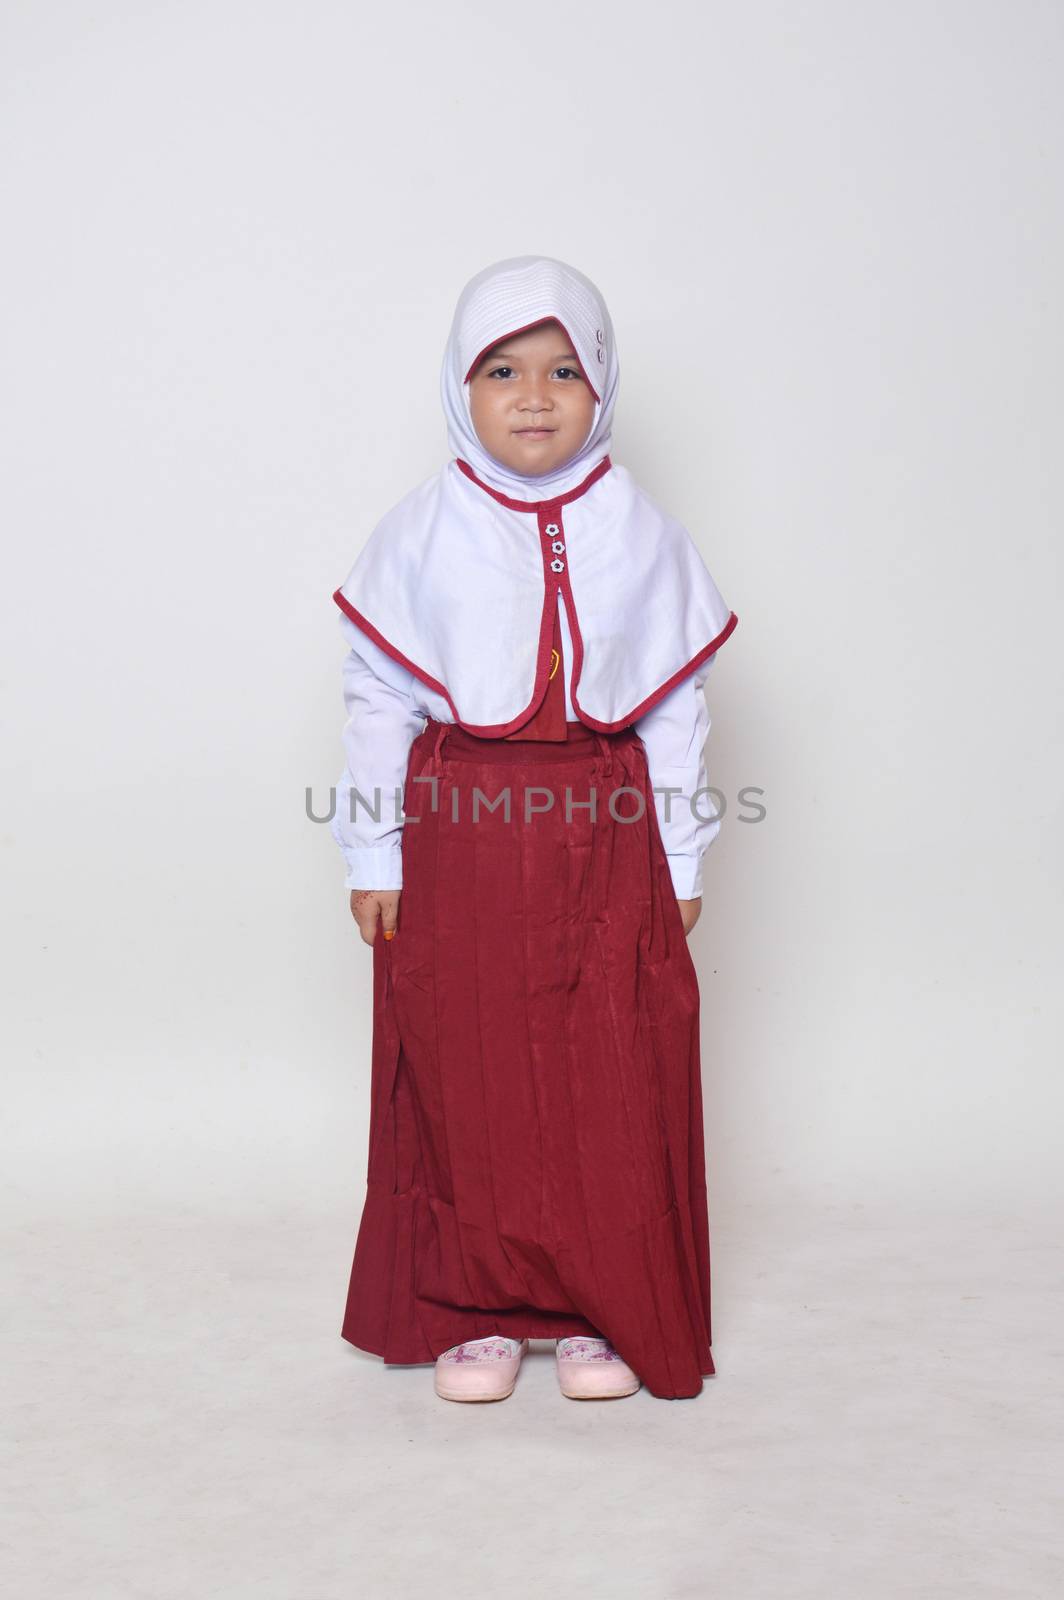 expression asian little girl with primary school uniform